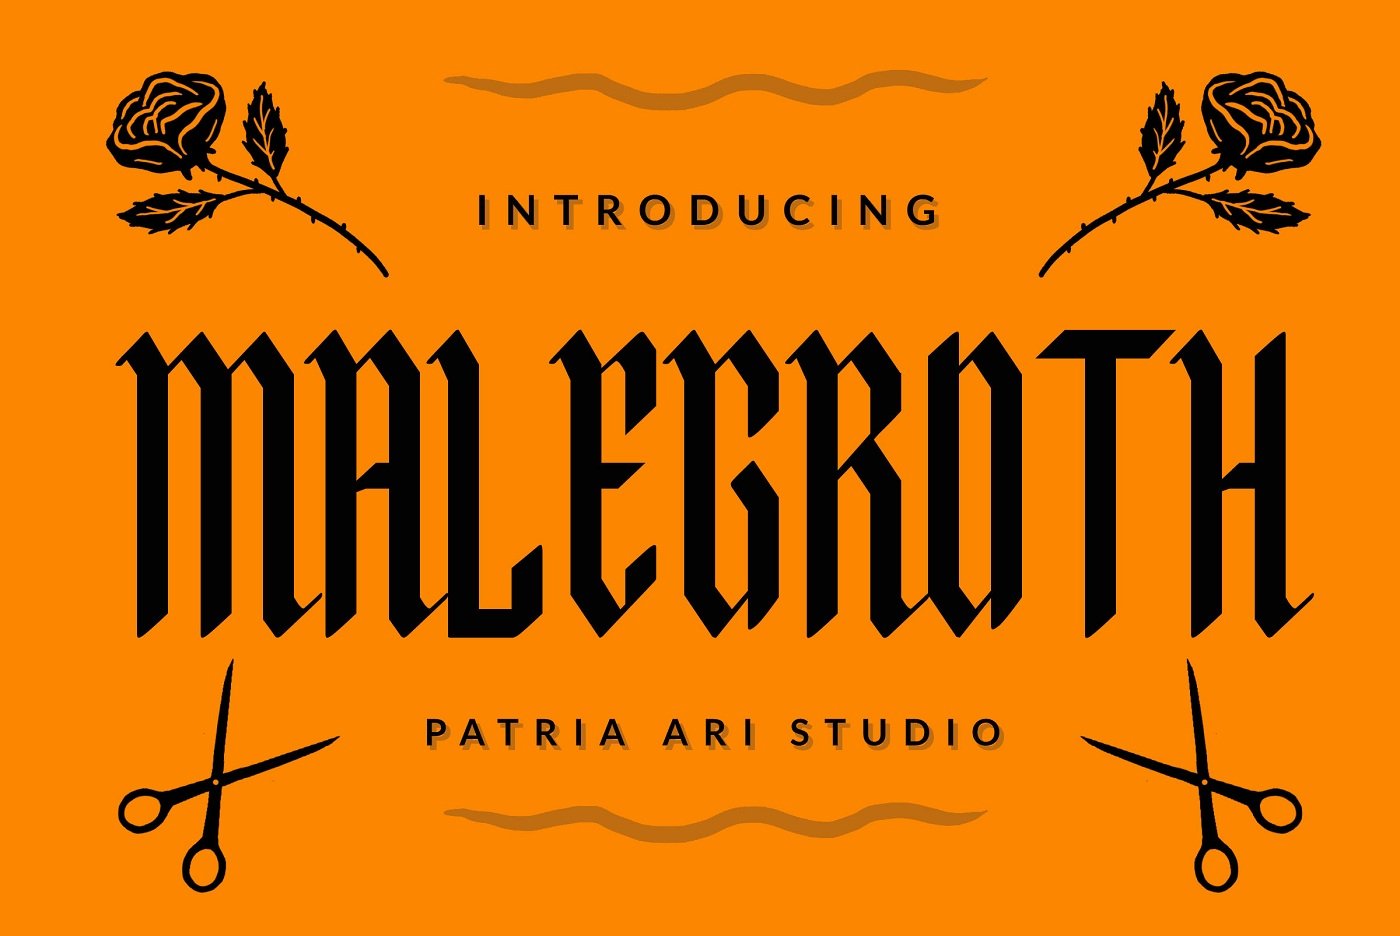 Malegroth - Tall Blackletter Fonts cover image.